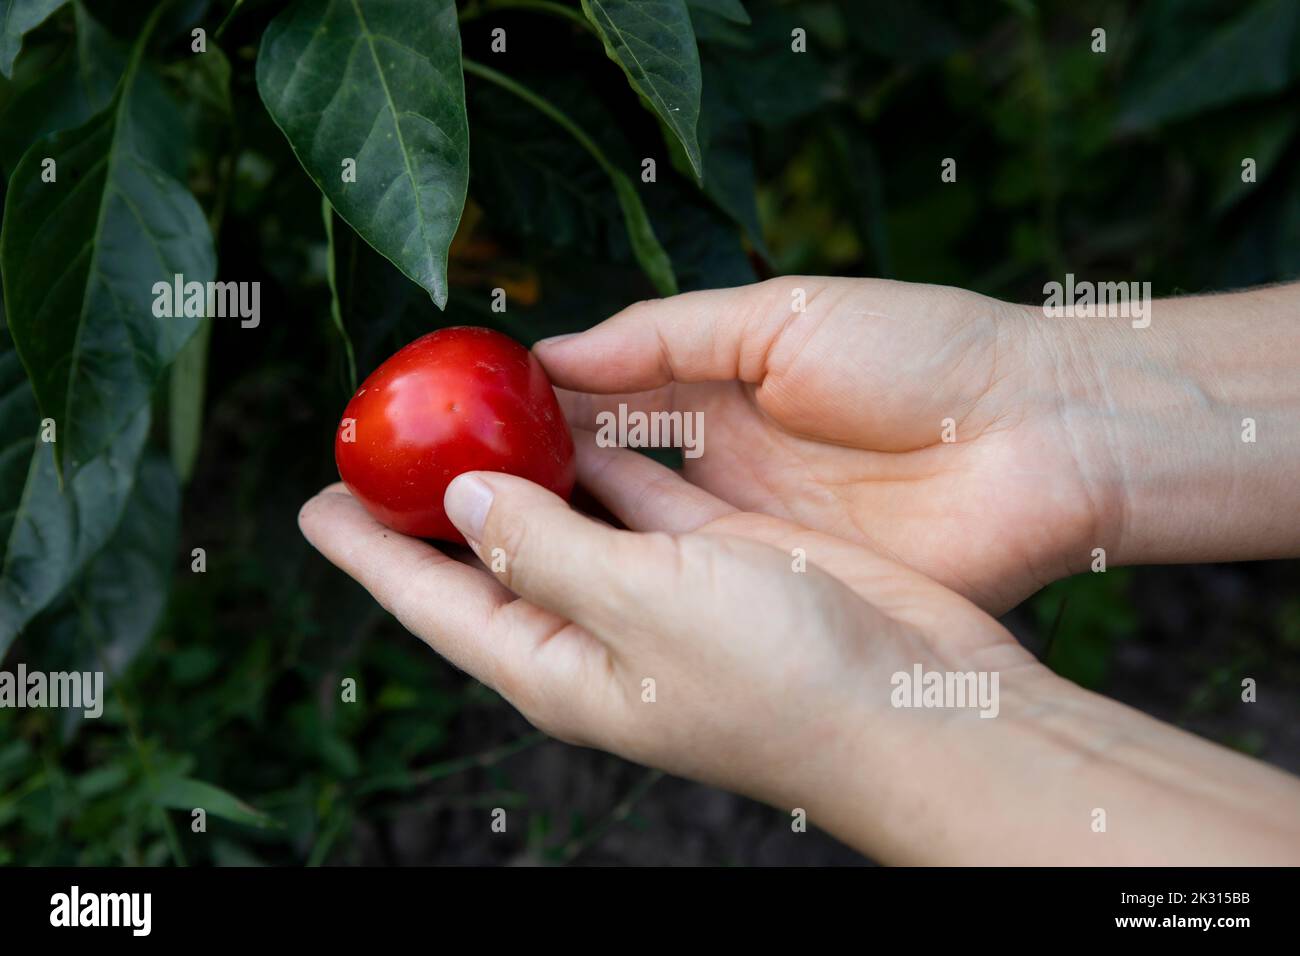 Hands of woman holding red bell pepper in vegetable garden Stock Photo